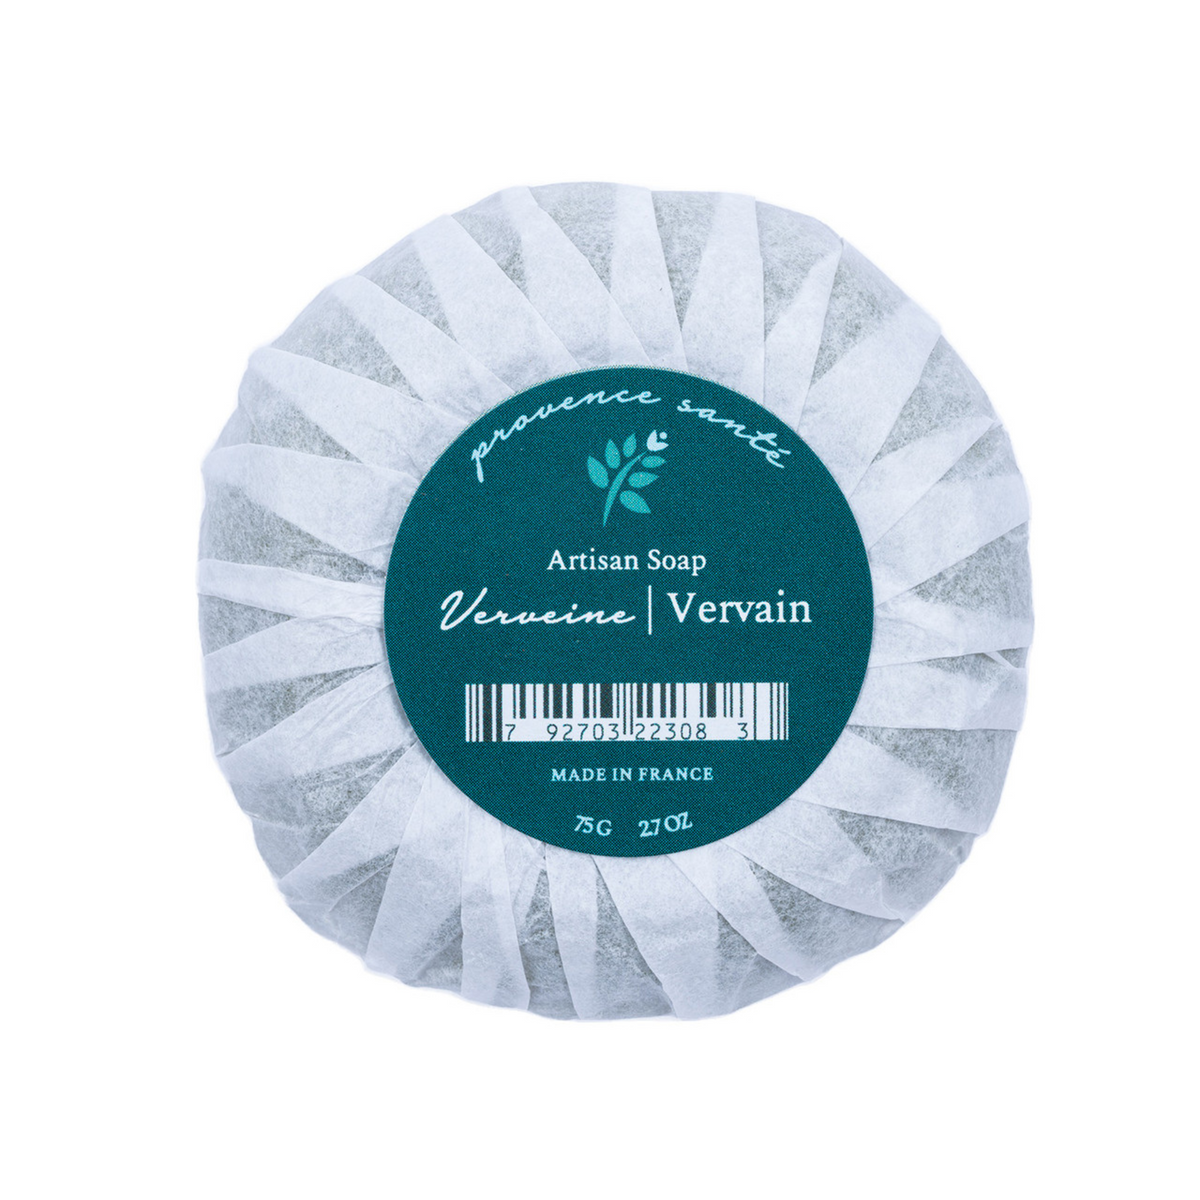 Primary image of Vervain Gift Soap